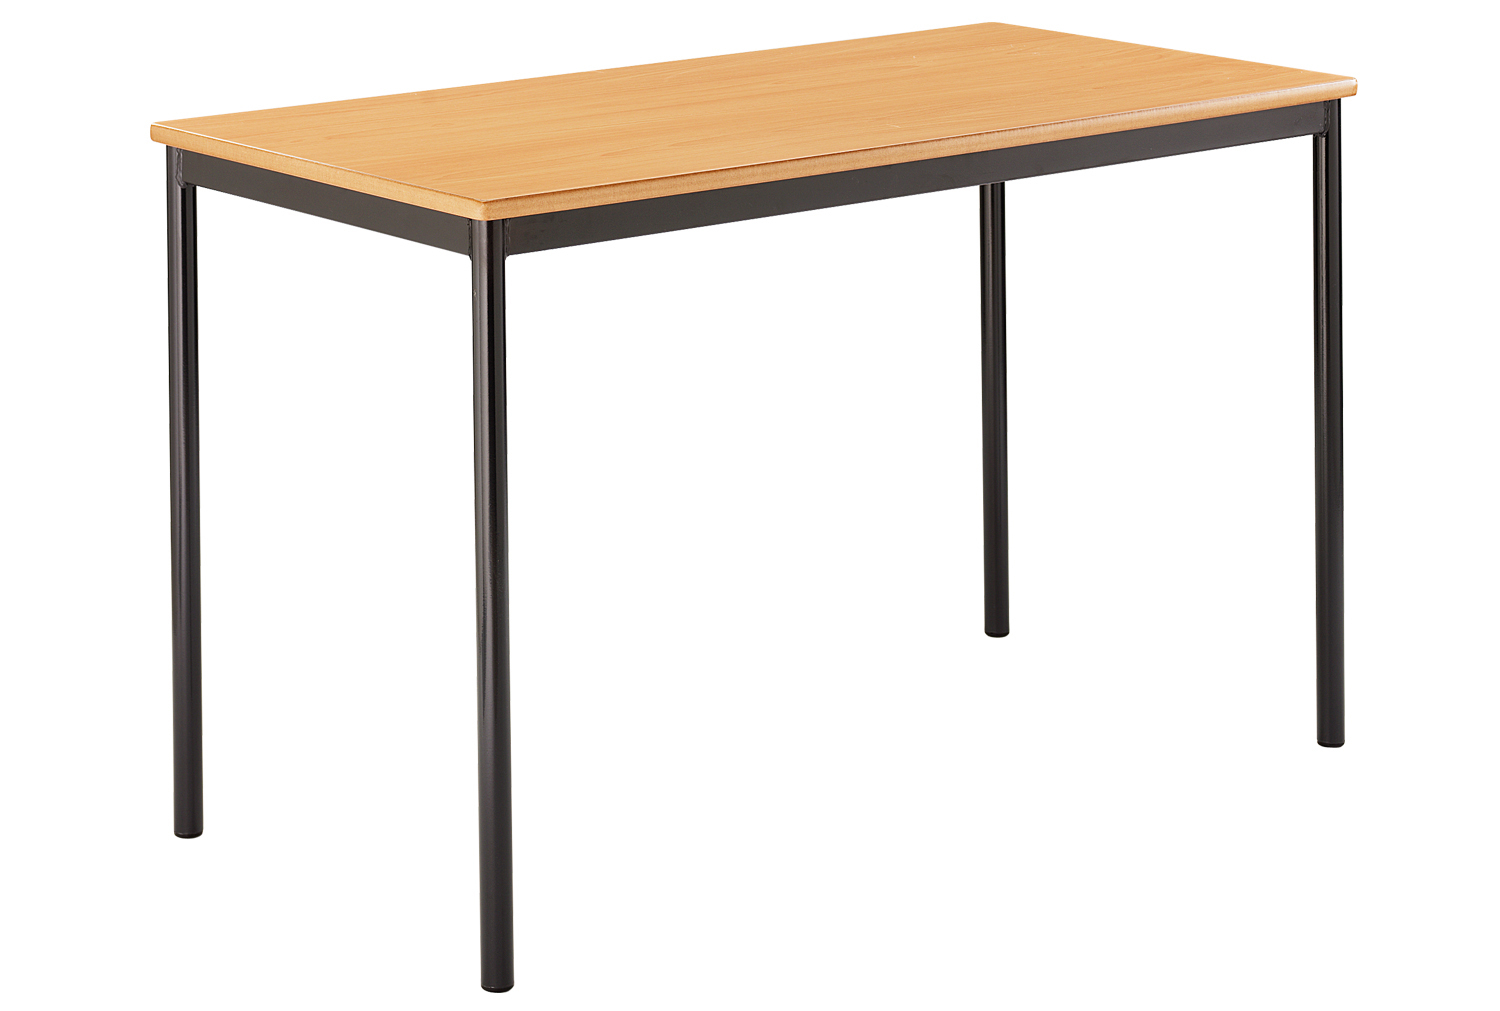 Qty 4 - Rectangular Fully Welded Classroom Tables 14+ Years, 120wx60dx76h (cm), Speckled Grey Frame, Blue Top, PU Blue Edge